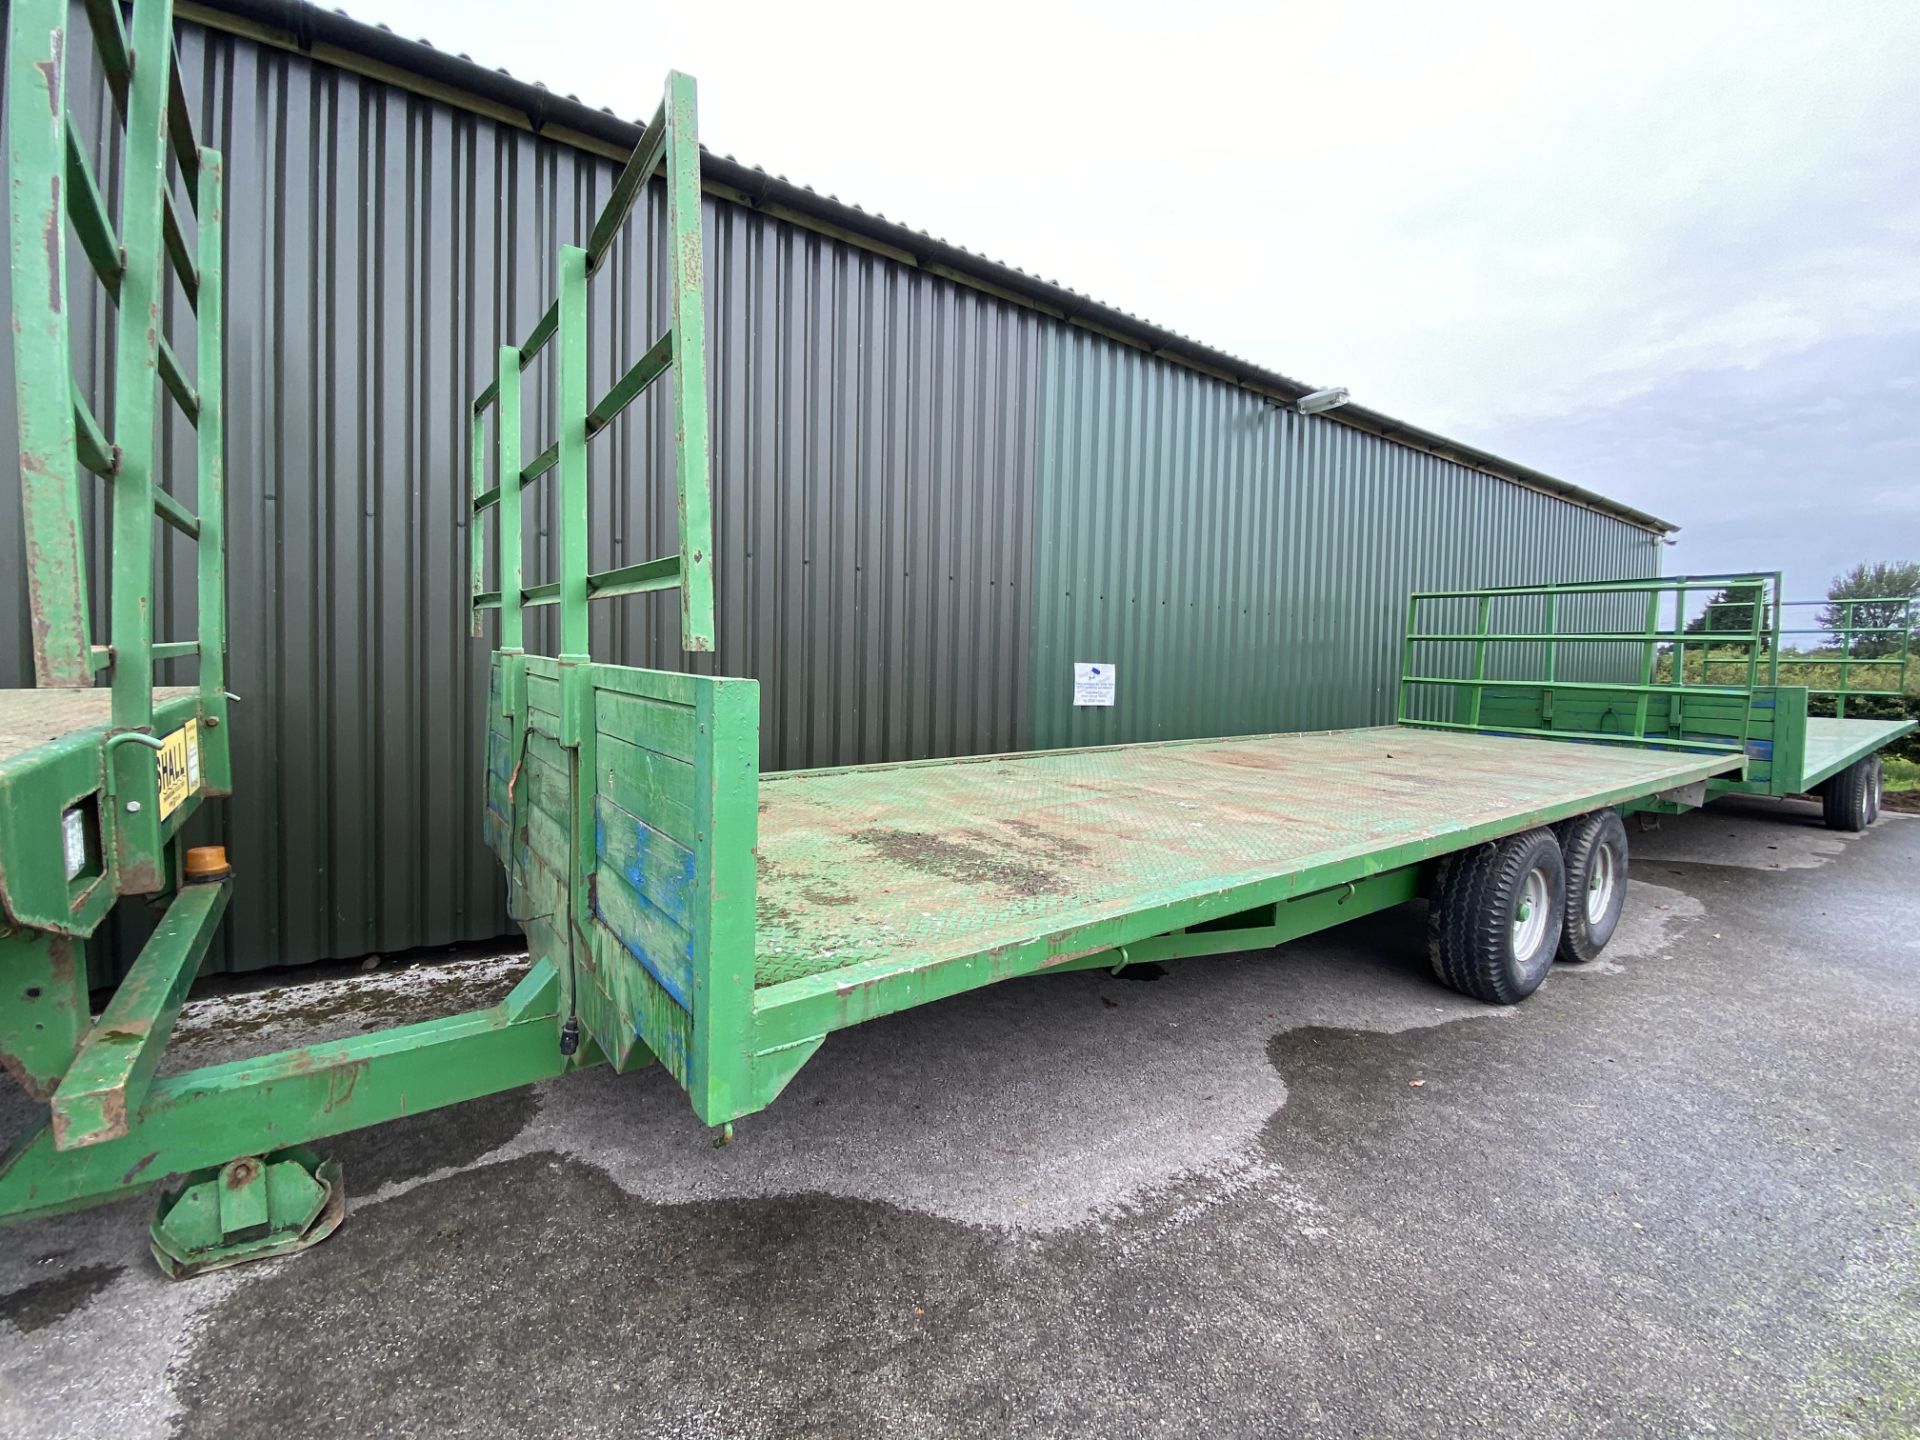 A 24 FOOT TANDEM AXLE BALE TRAILER WITH CHEQUER PLATE FLOORS AND ON 12.5/80 15.3 14PLY TYRES